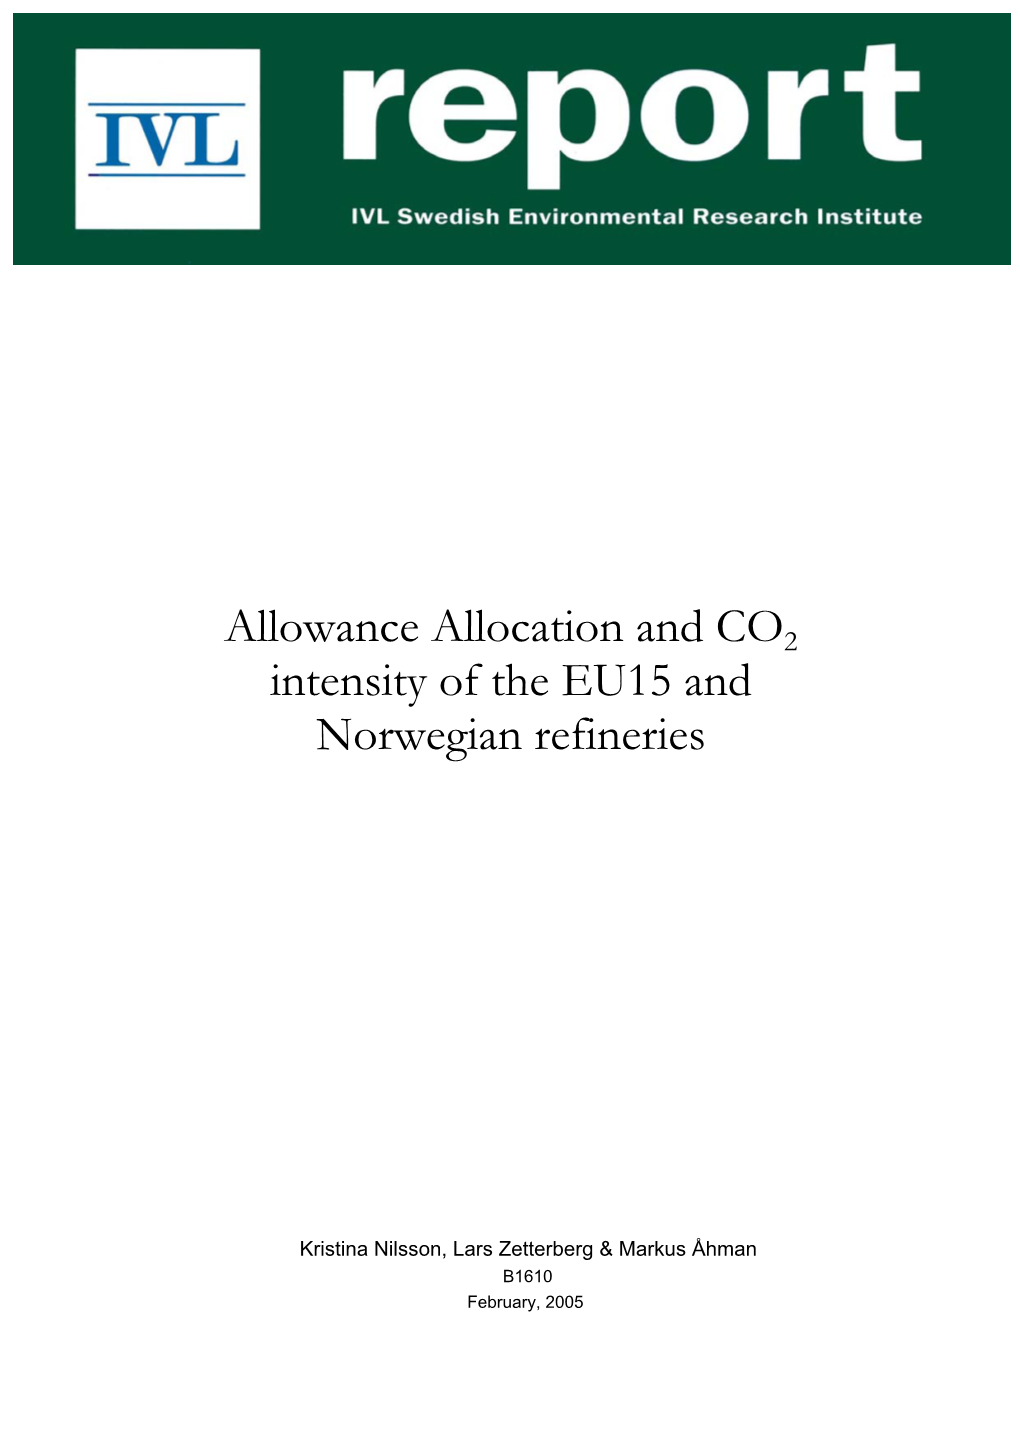 Allowance Allocation and CO2 Intensity of the EU15 and Norwegian Refineries